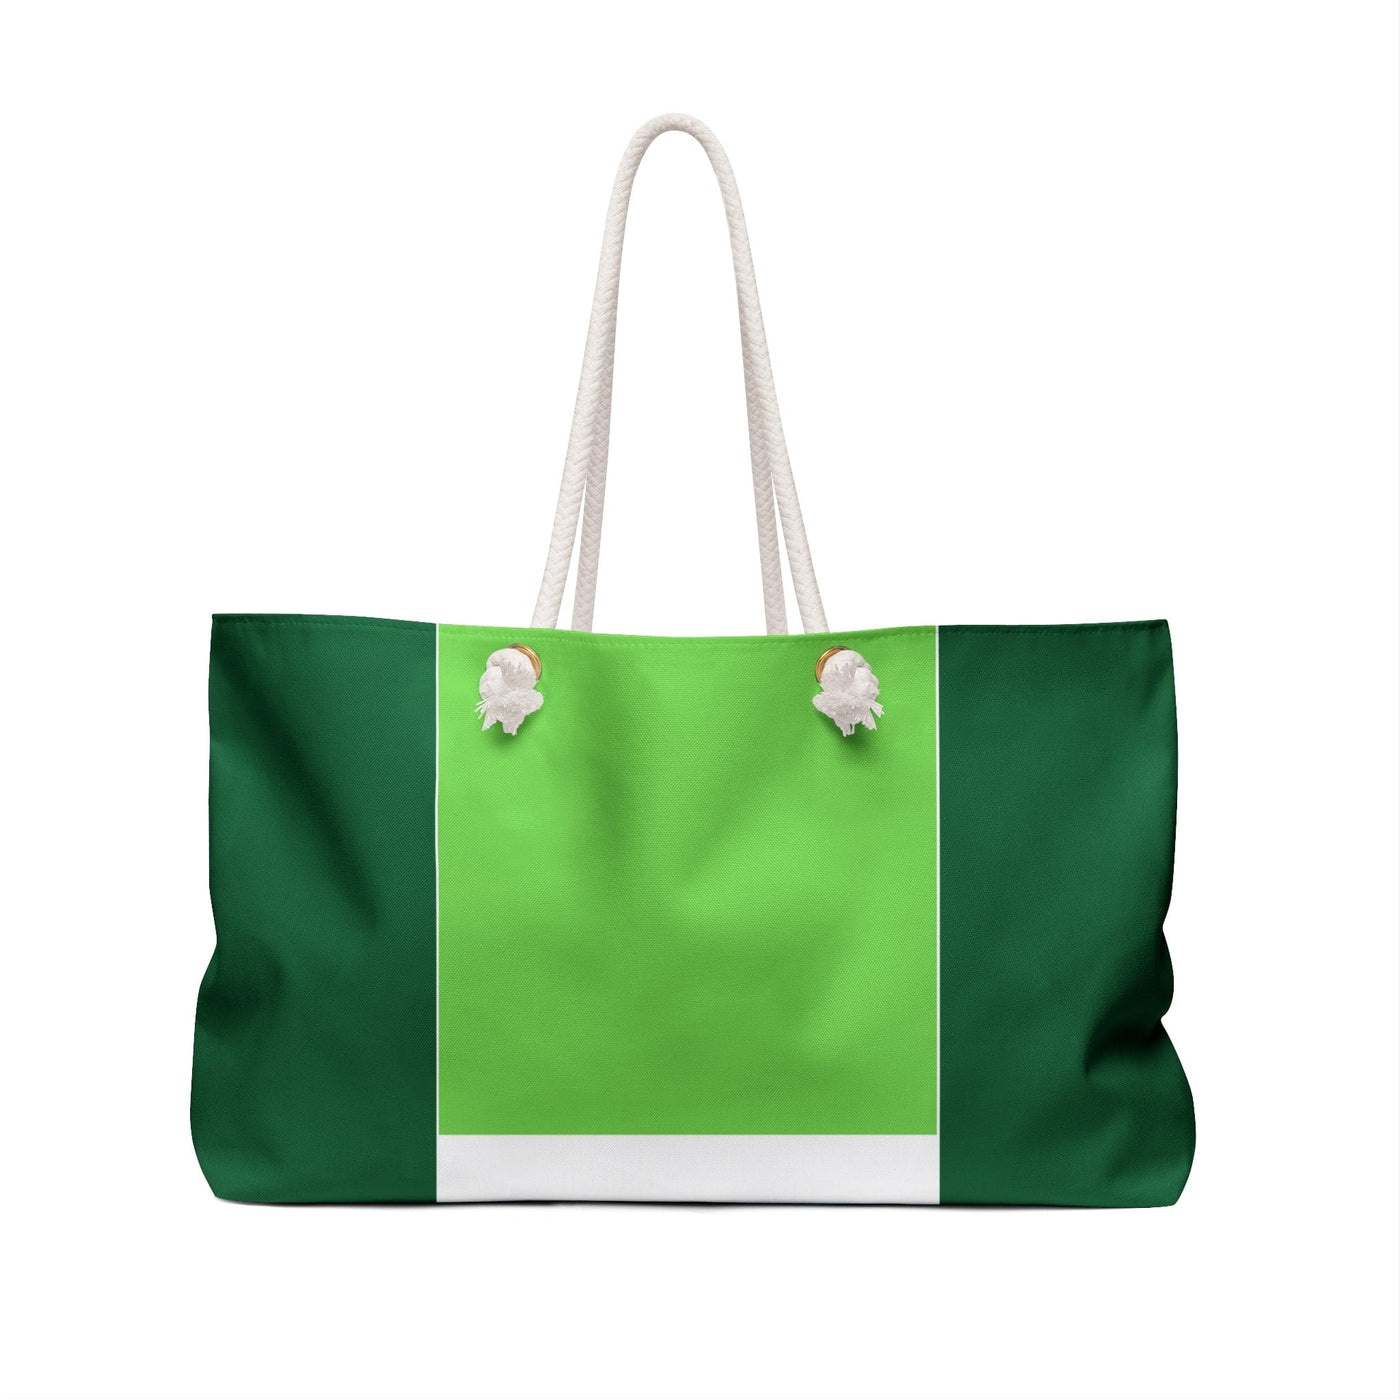 Weekender Tote Bag Lime Forest Irish Green Colorblock - Bags